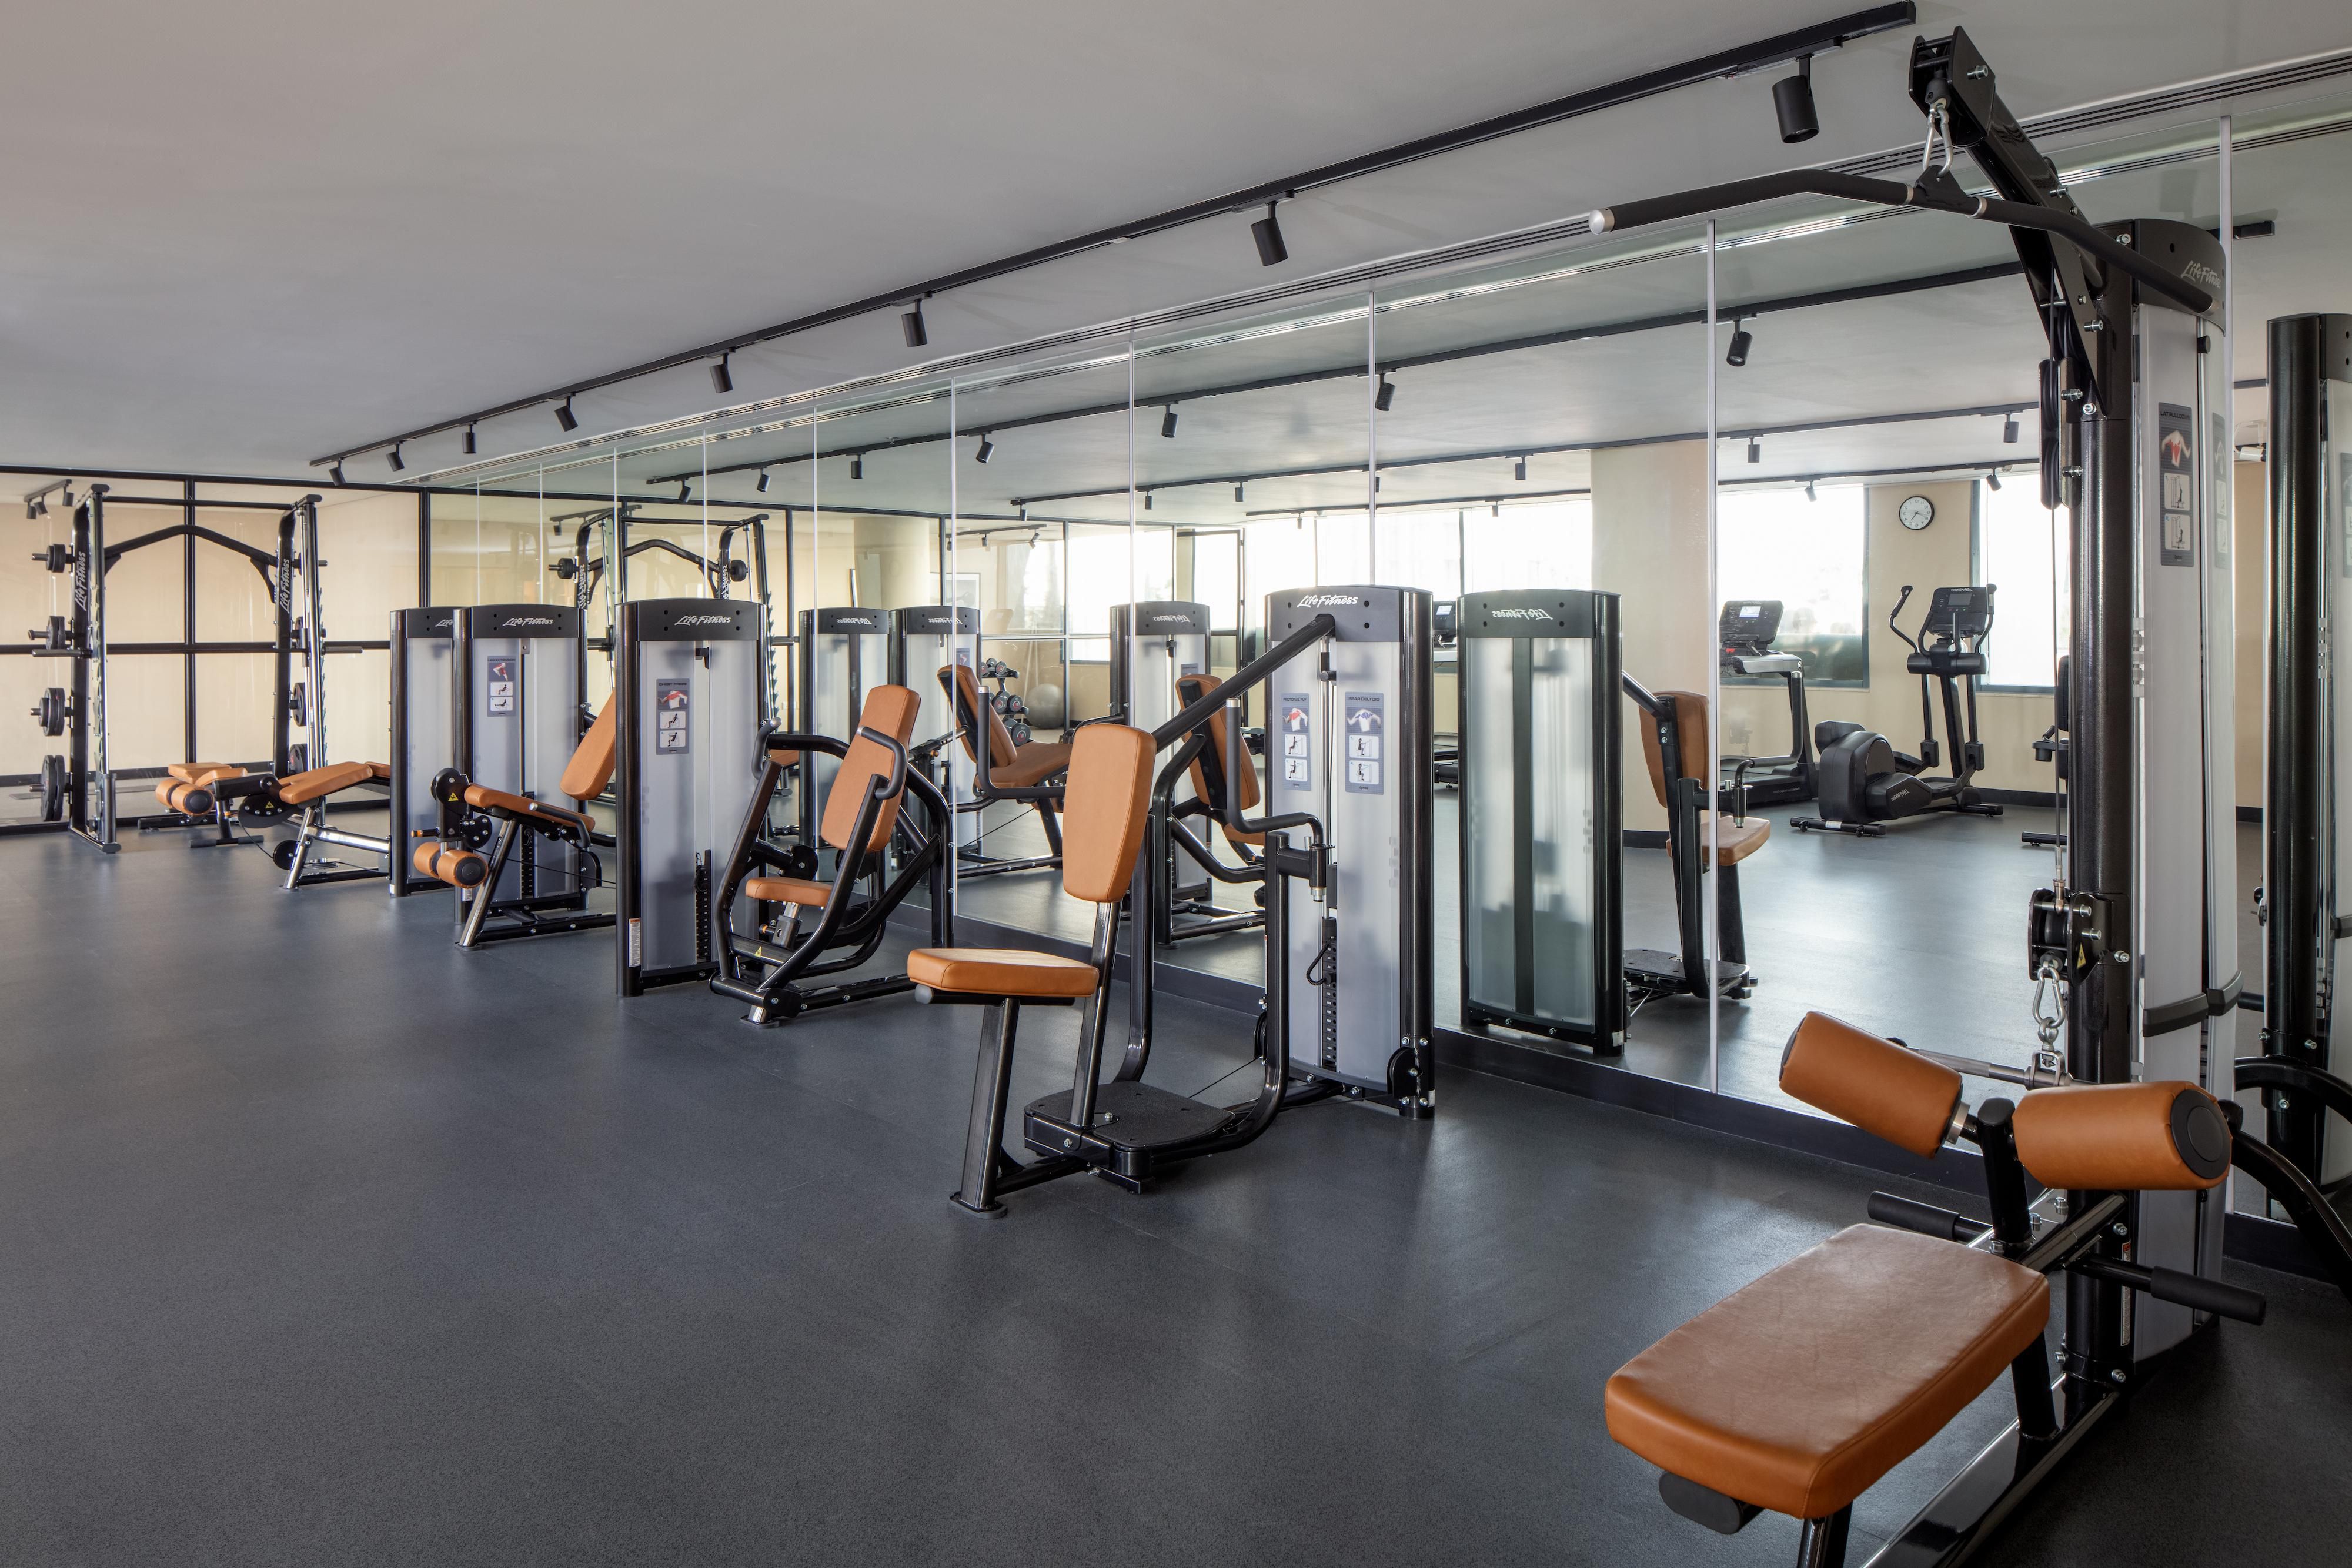 The modern fitness centre is equipped with everything you need to kick-start your daily work out overlooking the crystal clear infinity pool. A separate sauna room for ladies and gents is also available to relax your tired muscles after working out.